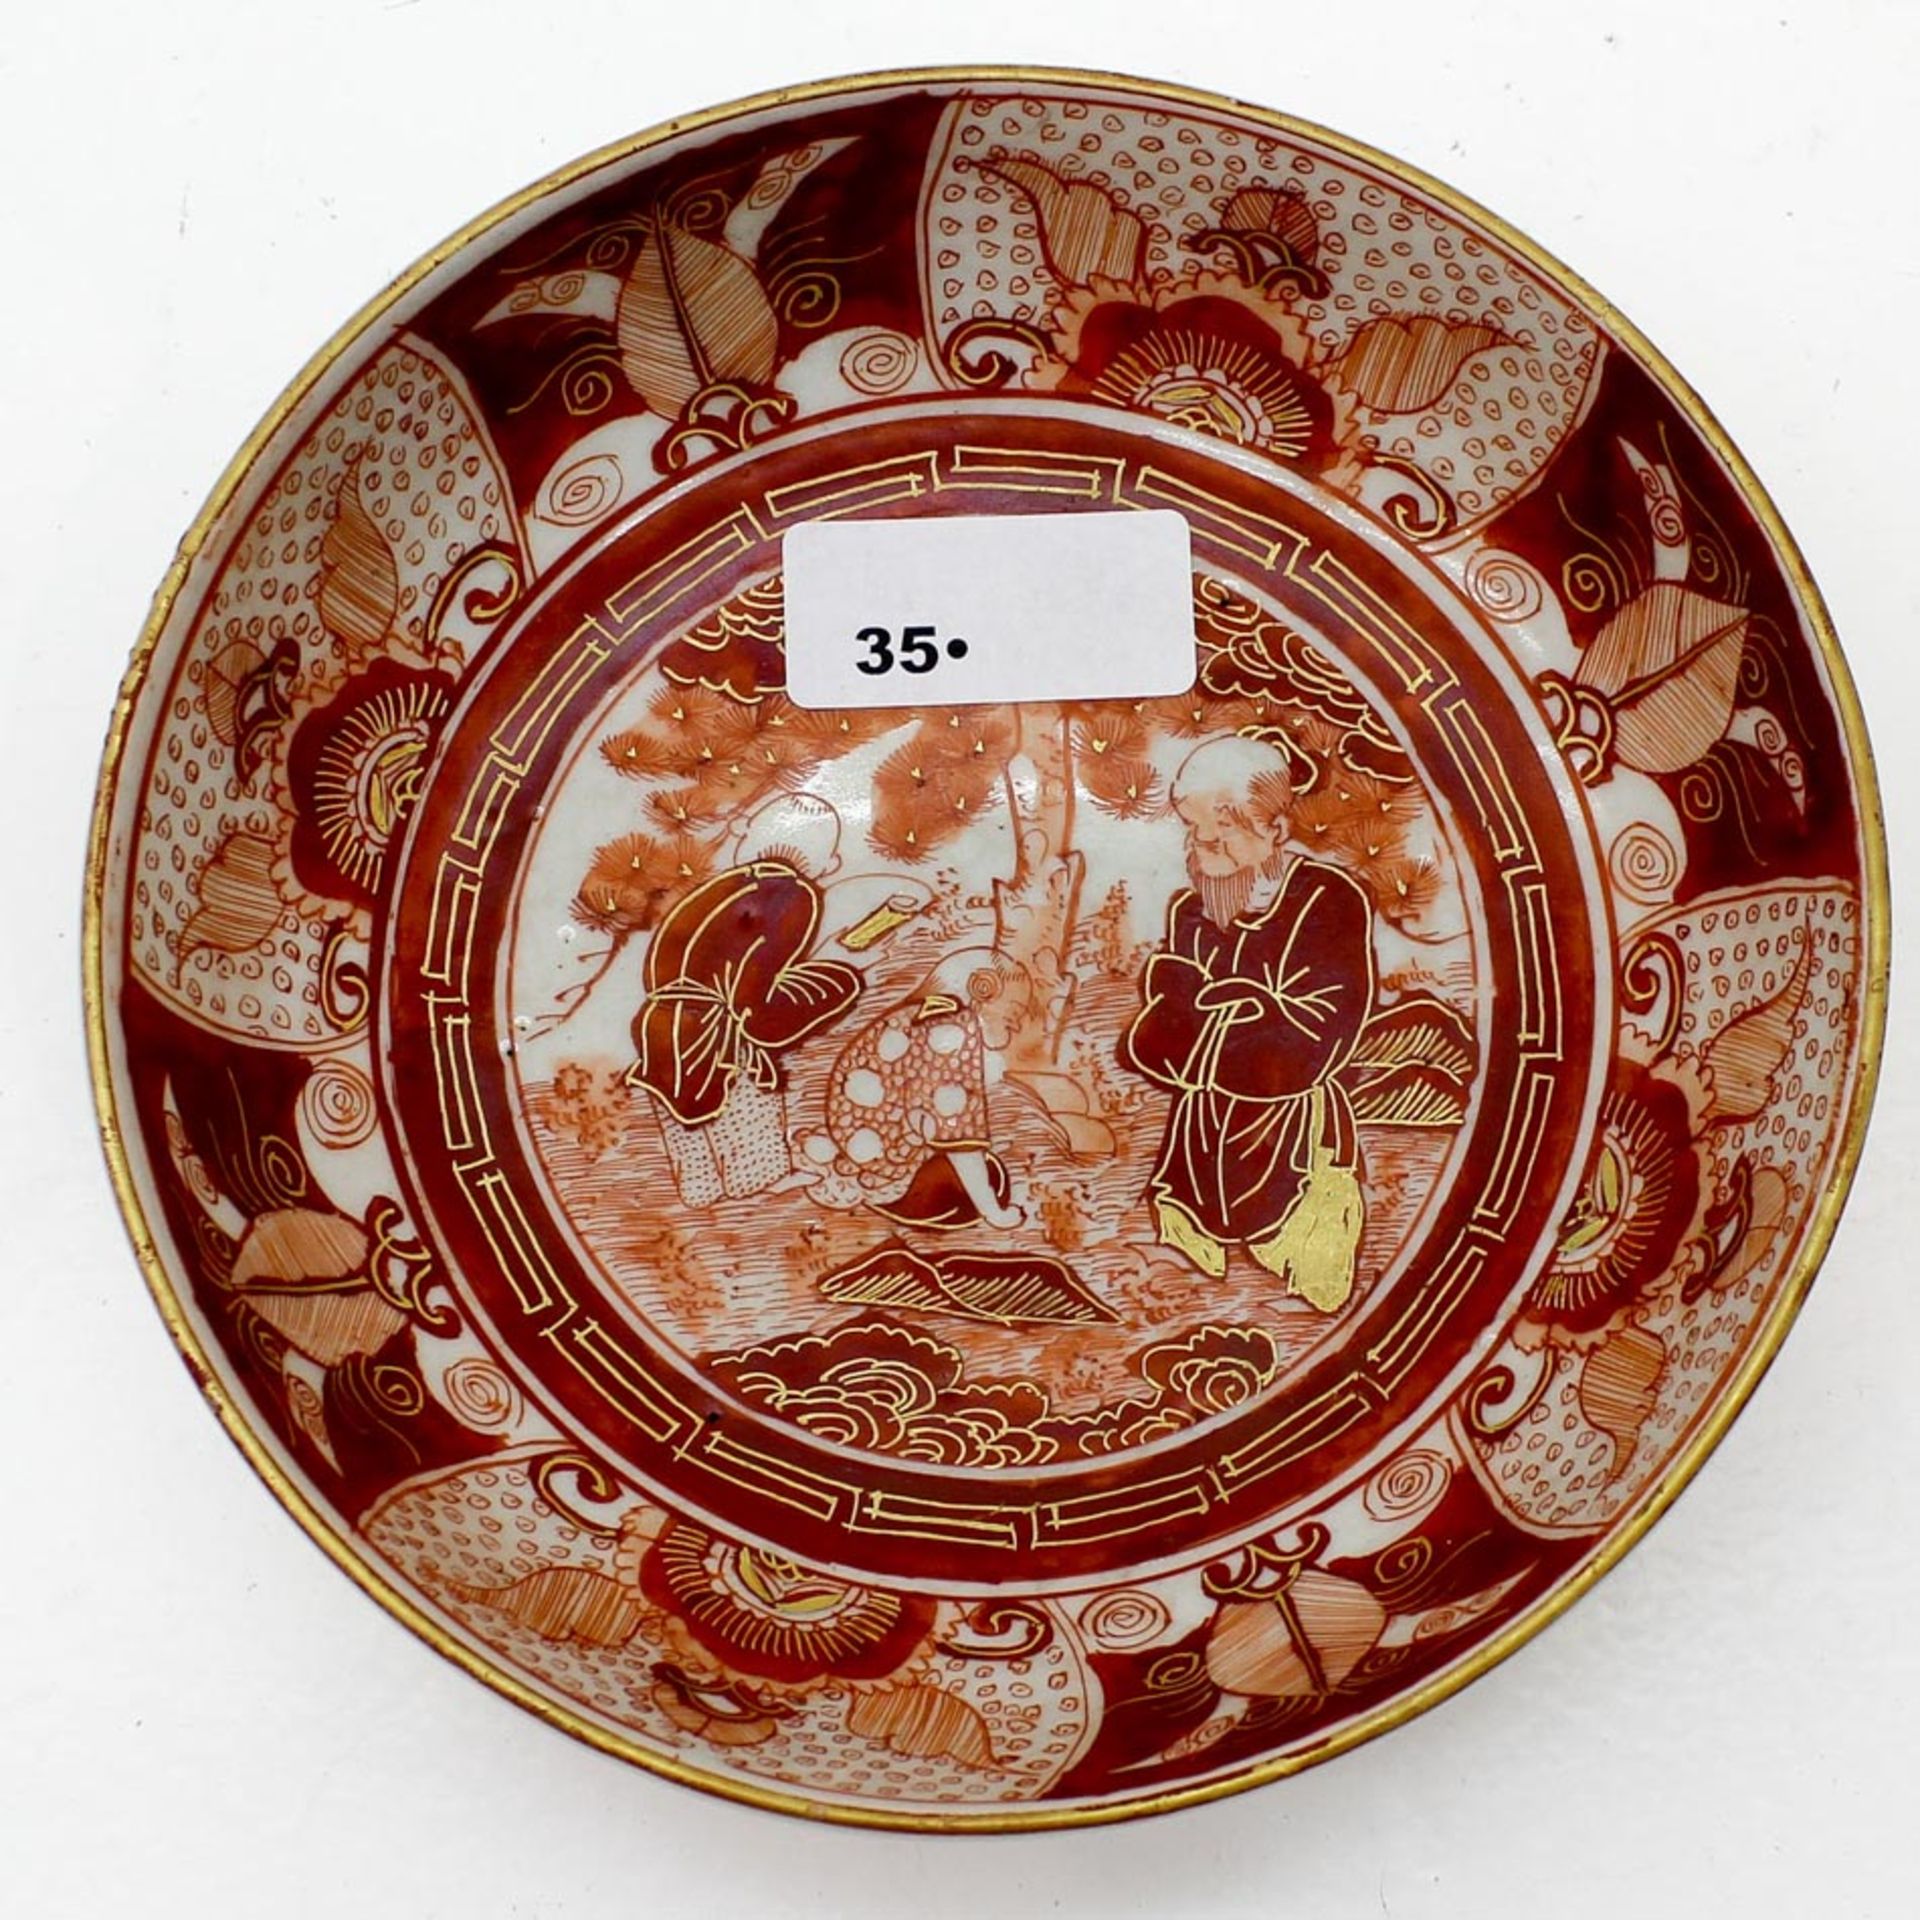 Japanese Porcelain Dessert Plate Decor in deep reds and corals, marked on bottom, small chip, 15